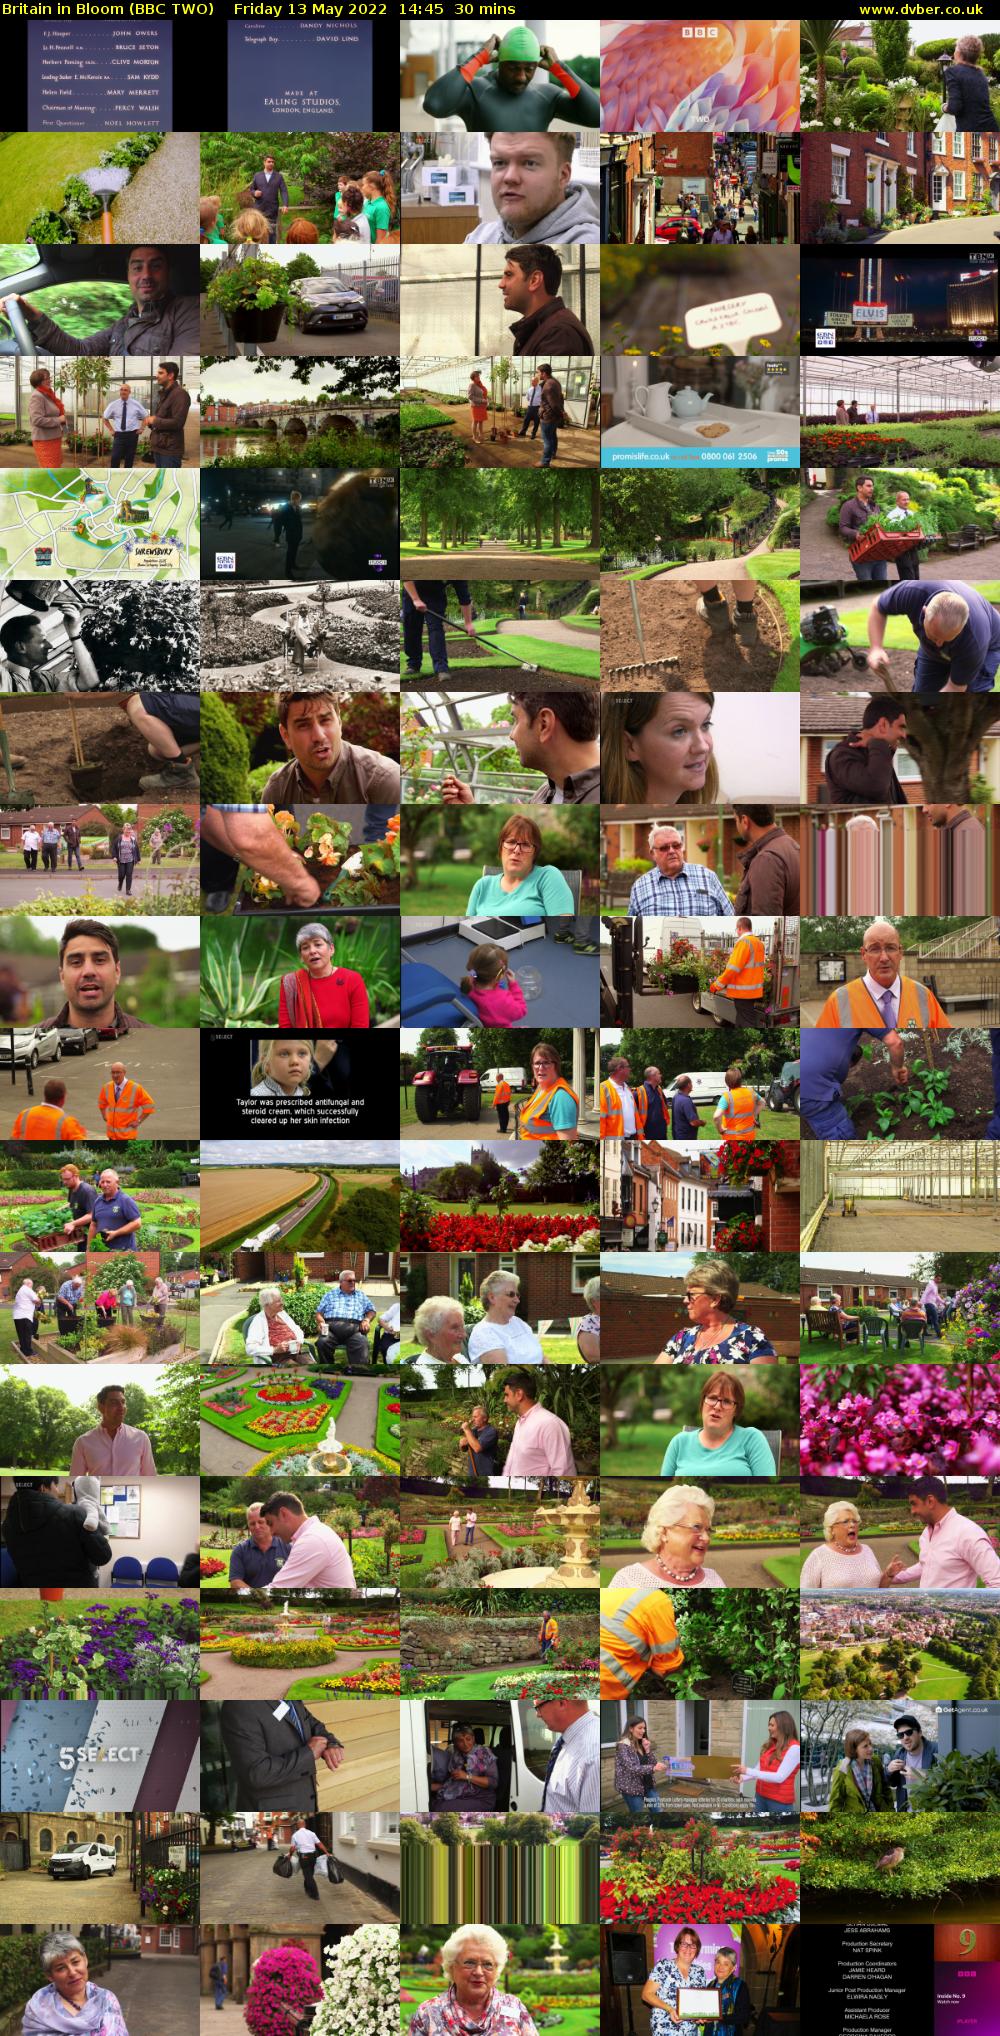 Britain in Bloom (BBC TWO) Friday 13 May 2022 14:45 - 15:15